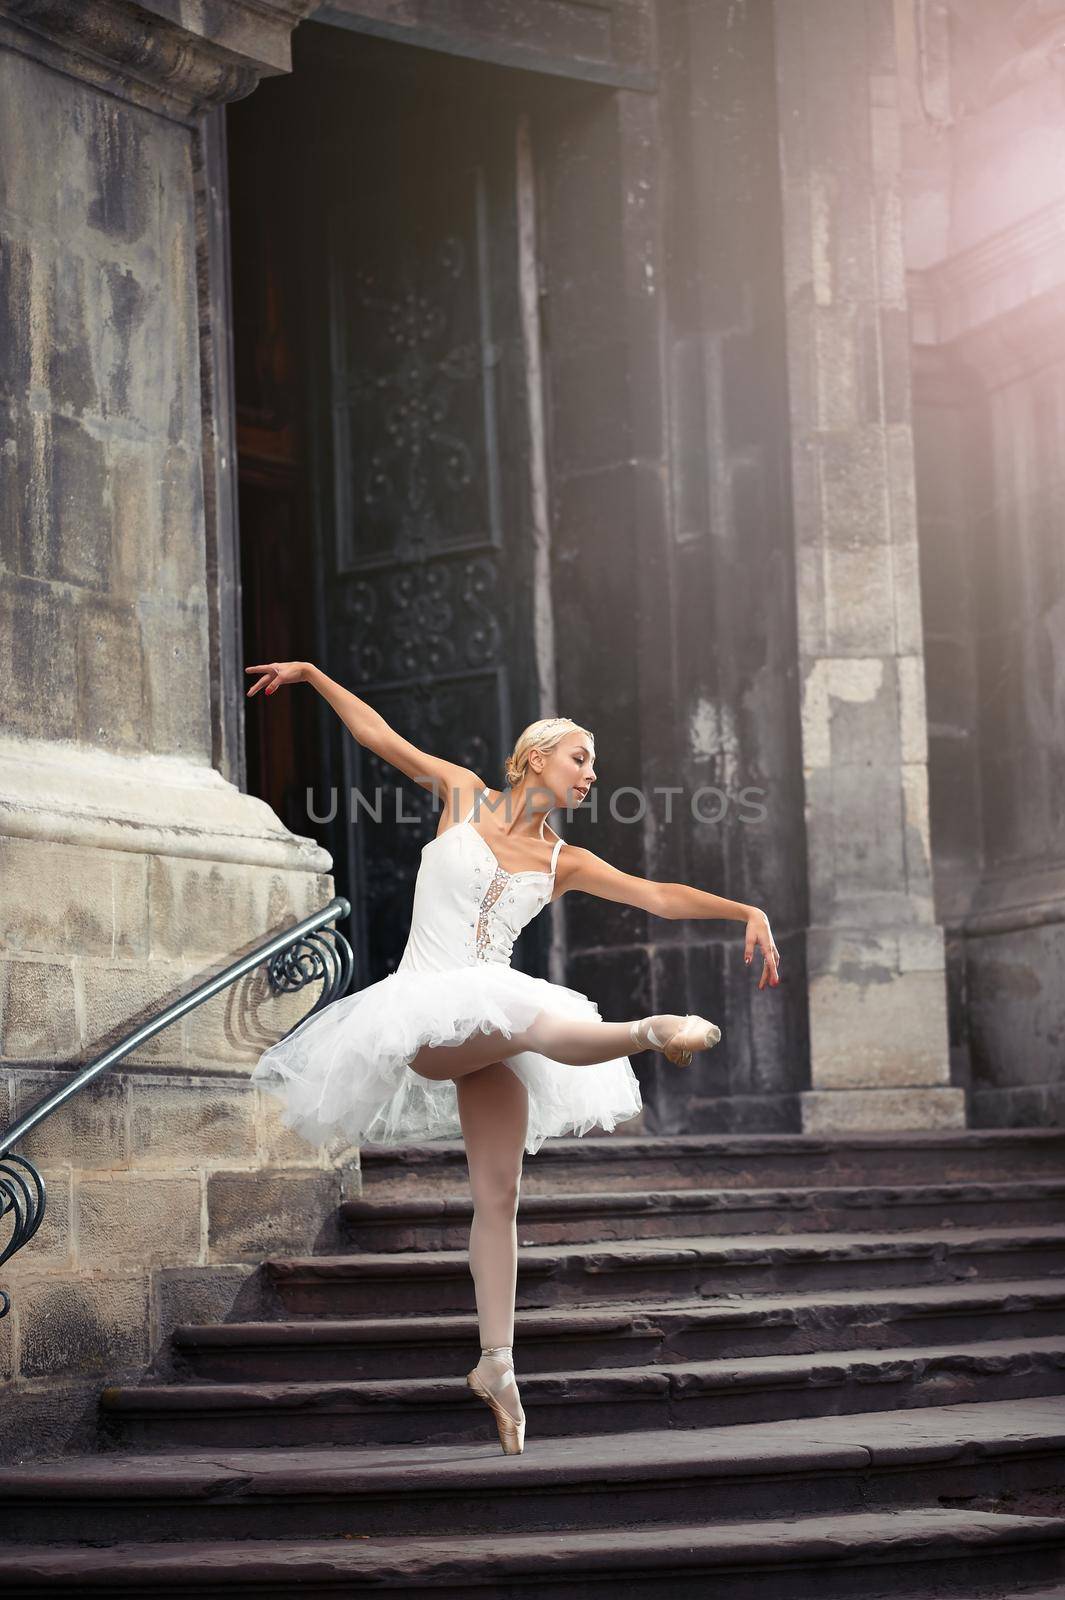 She went looking for inspiration. Full length portrait of a ballerina dancing gracefully near an old house